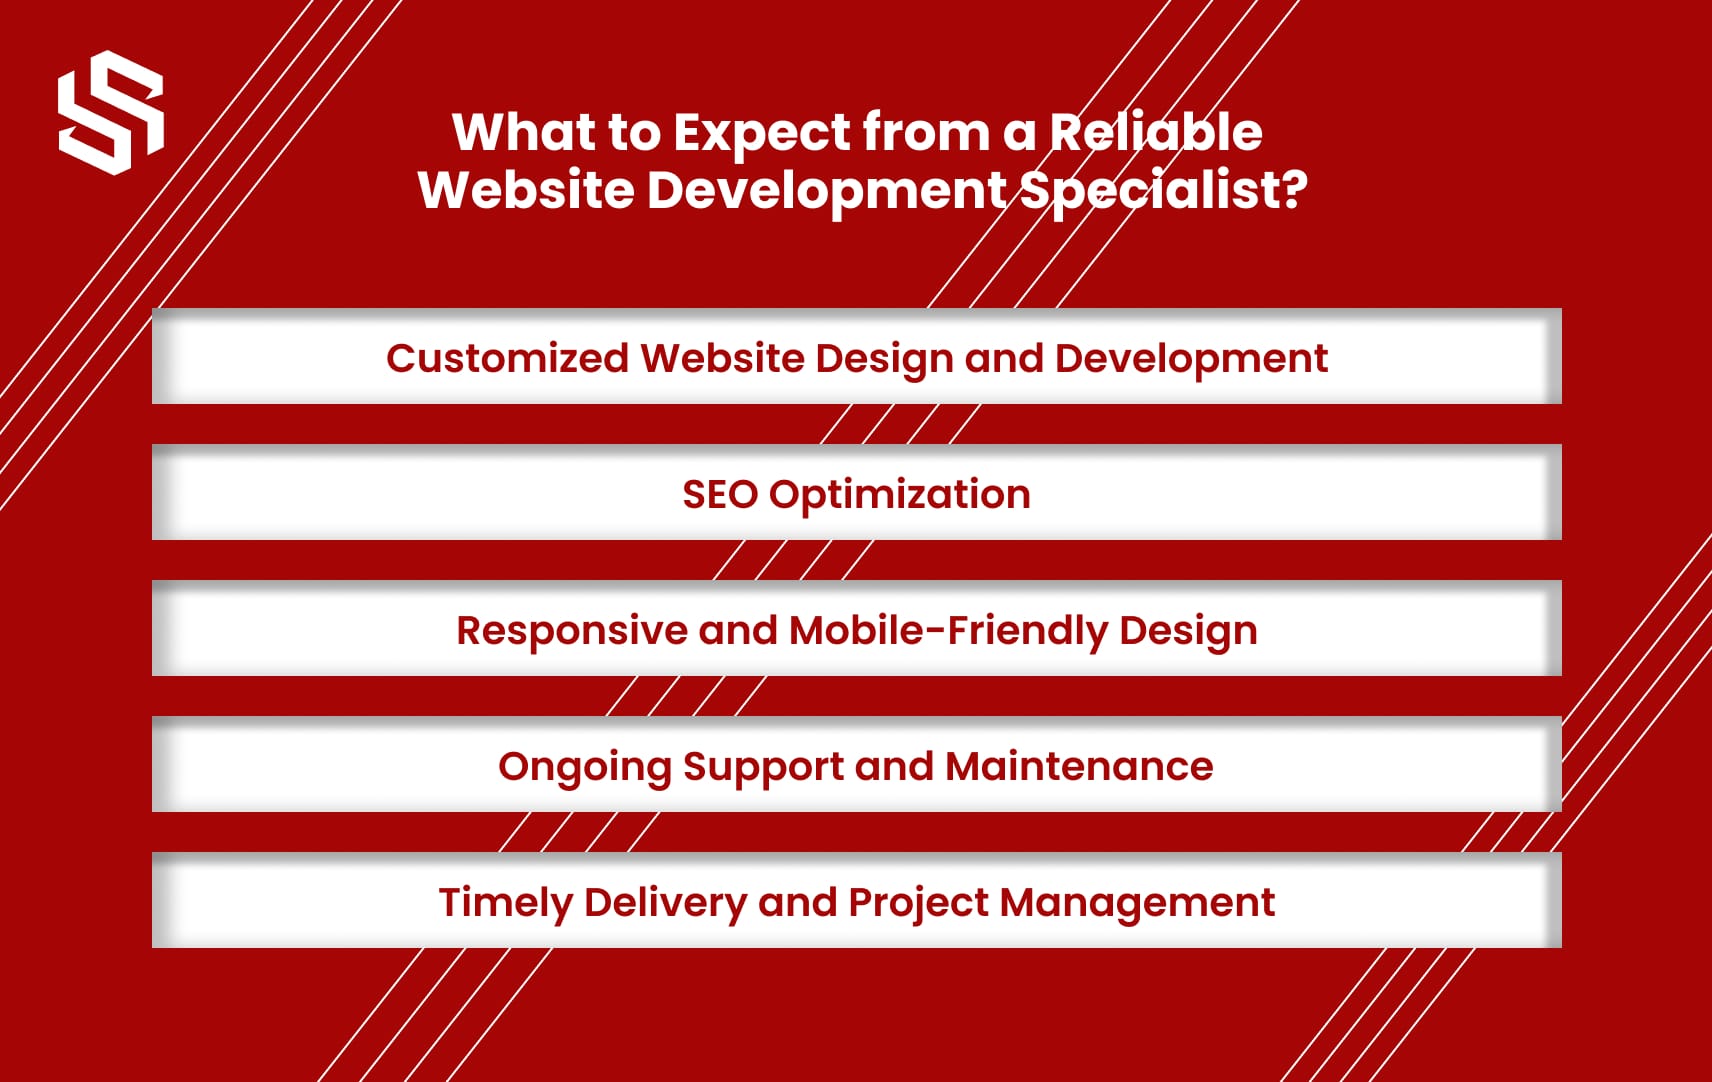 What to Expect from a Reliable Website Development Specialist